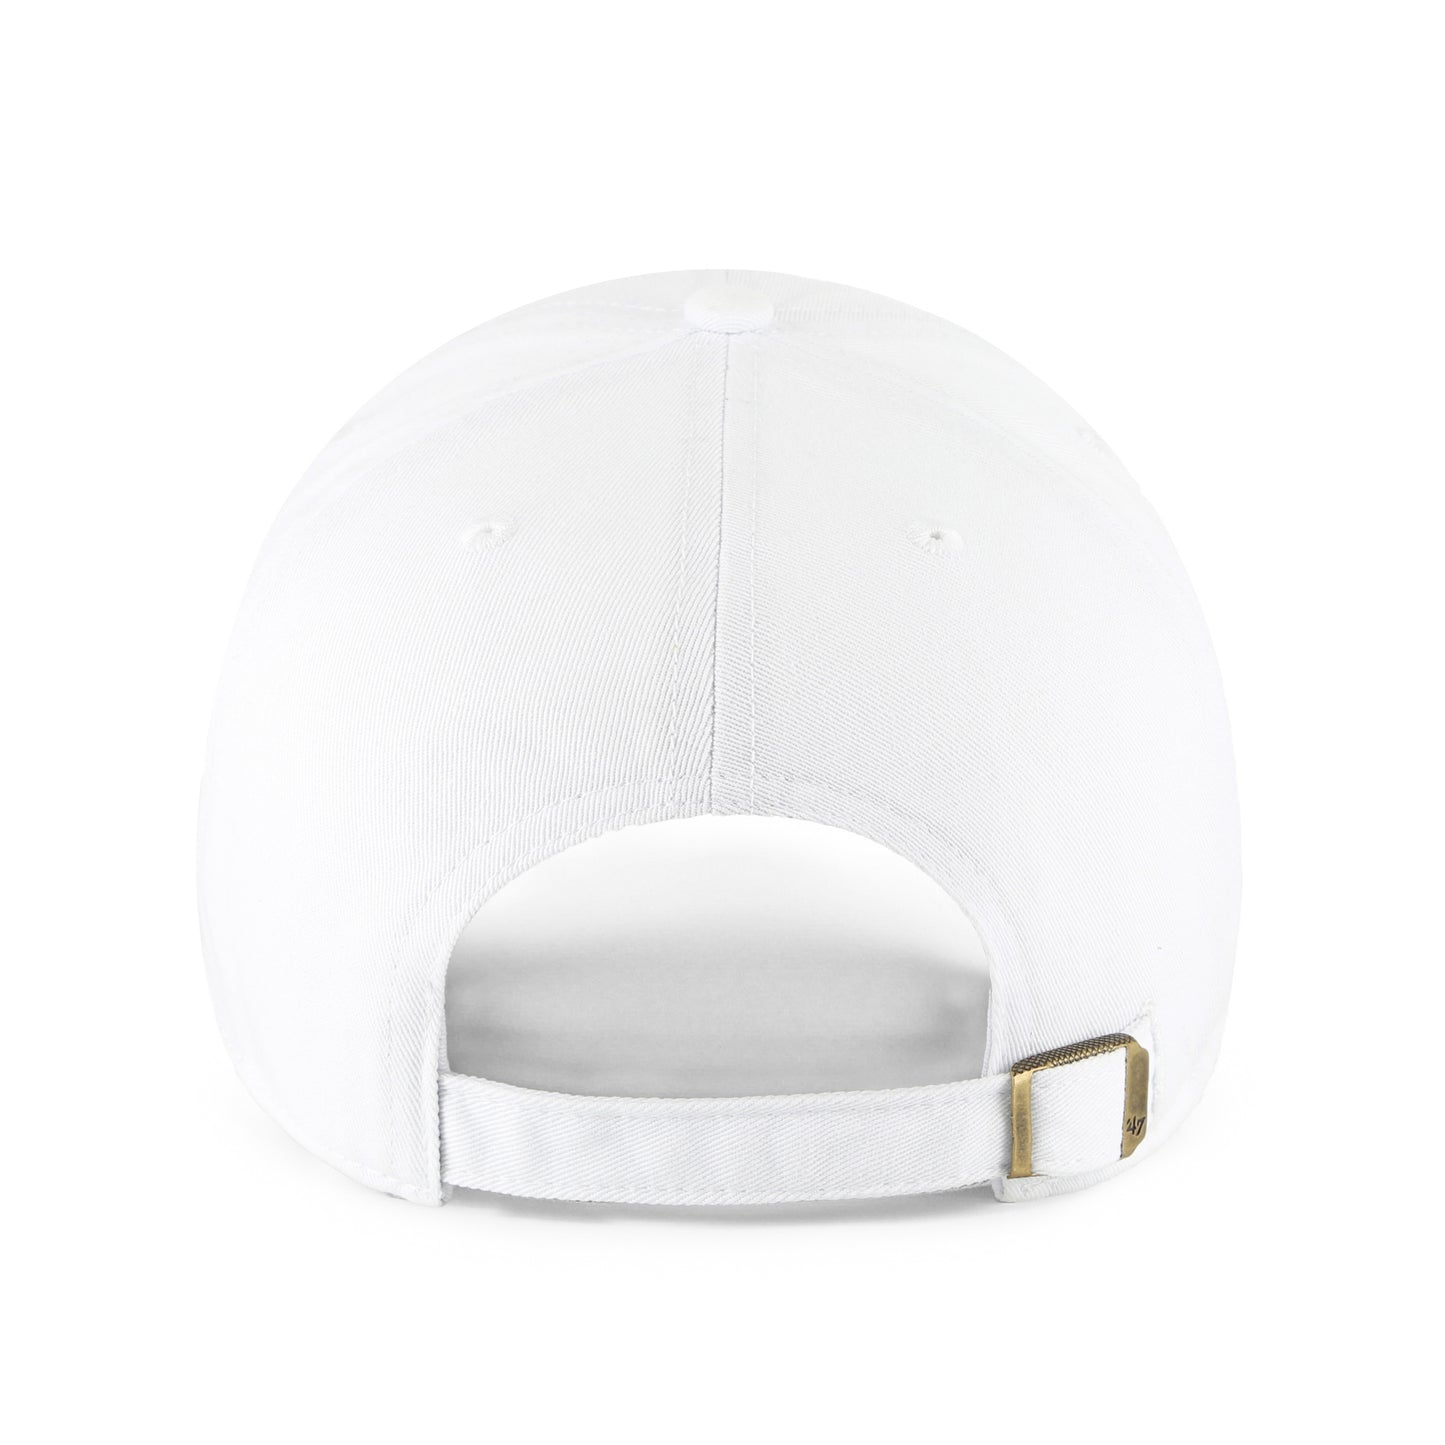 Back of white hat with sizing clasp